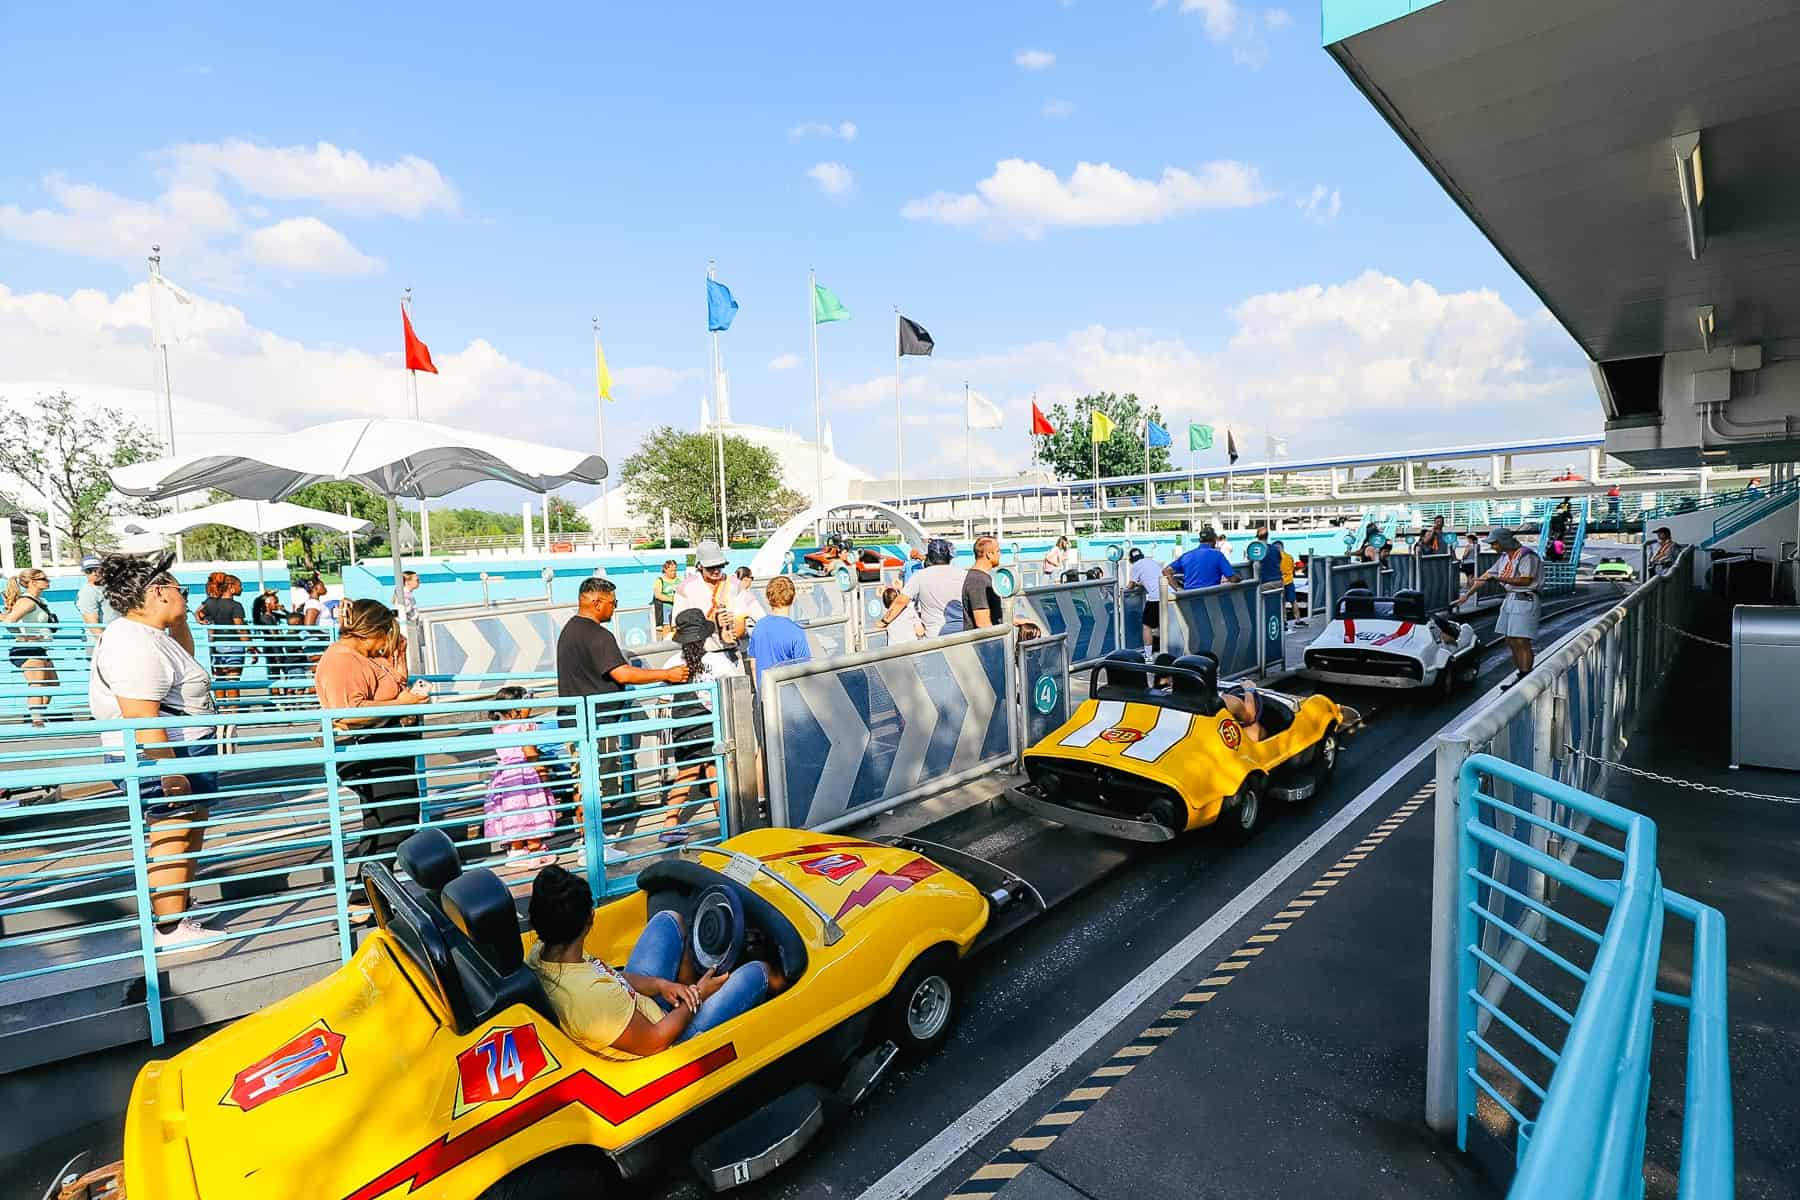 Guests boarding the ride vehicles. 